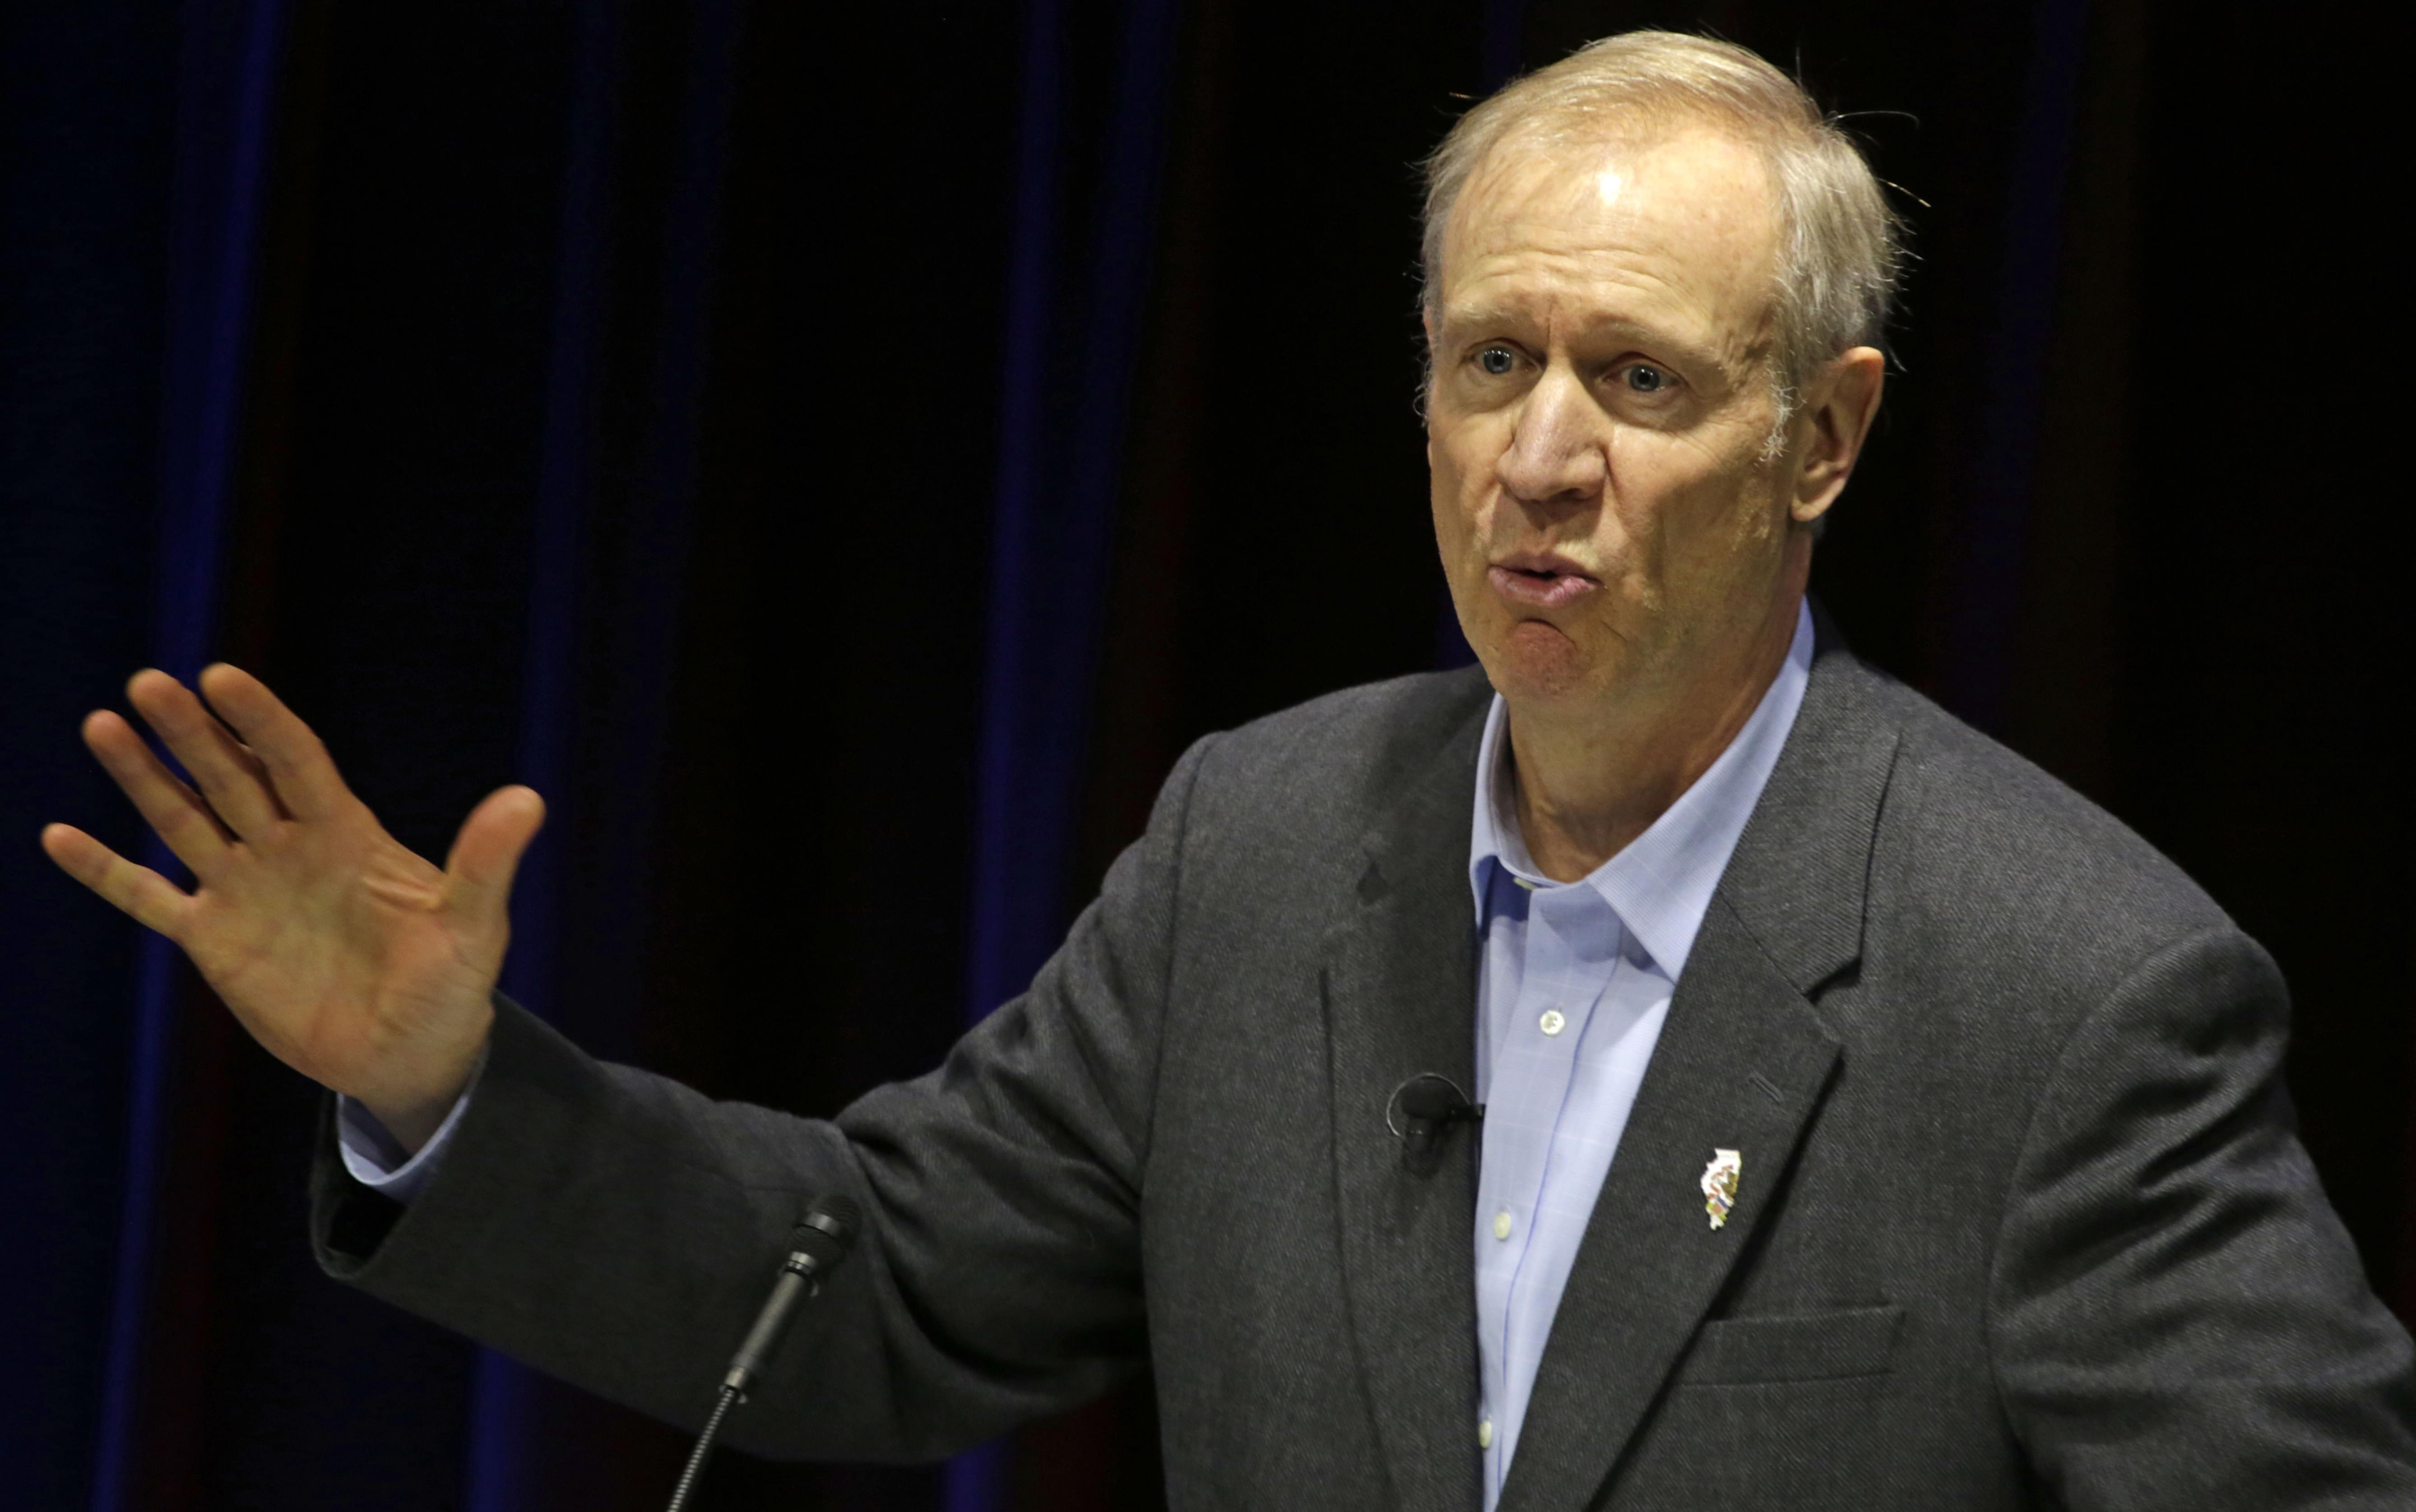 In this Dec. 3, 2015, file photo, Illinois Gov. Bruce Rauner speaks at an event in Chicago. Illinois legislative leaders said they made minor progress during a Tuesday, Dec. 8, meeting aimed at ending the state budget stalemate, including agreeing to